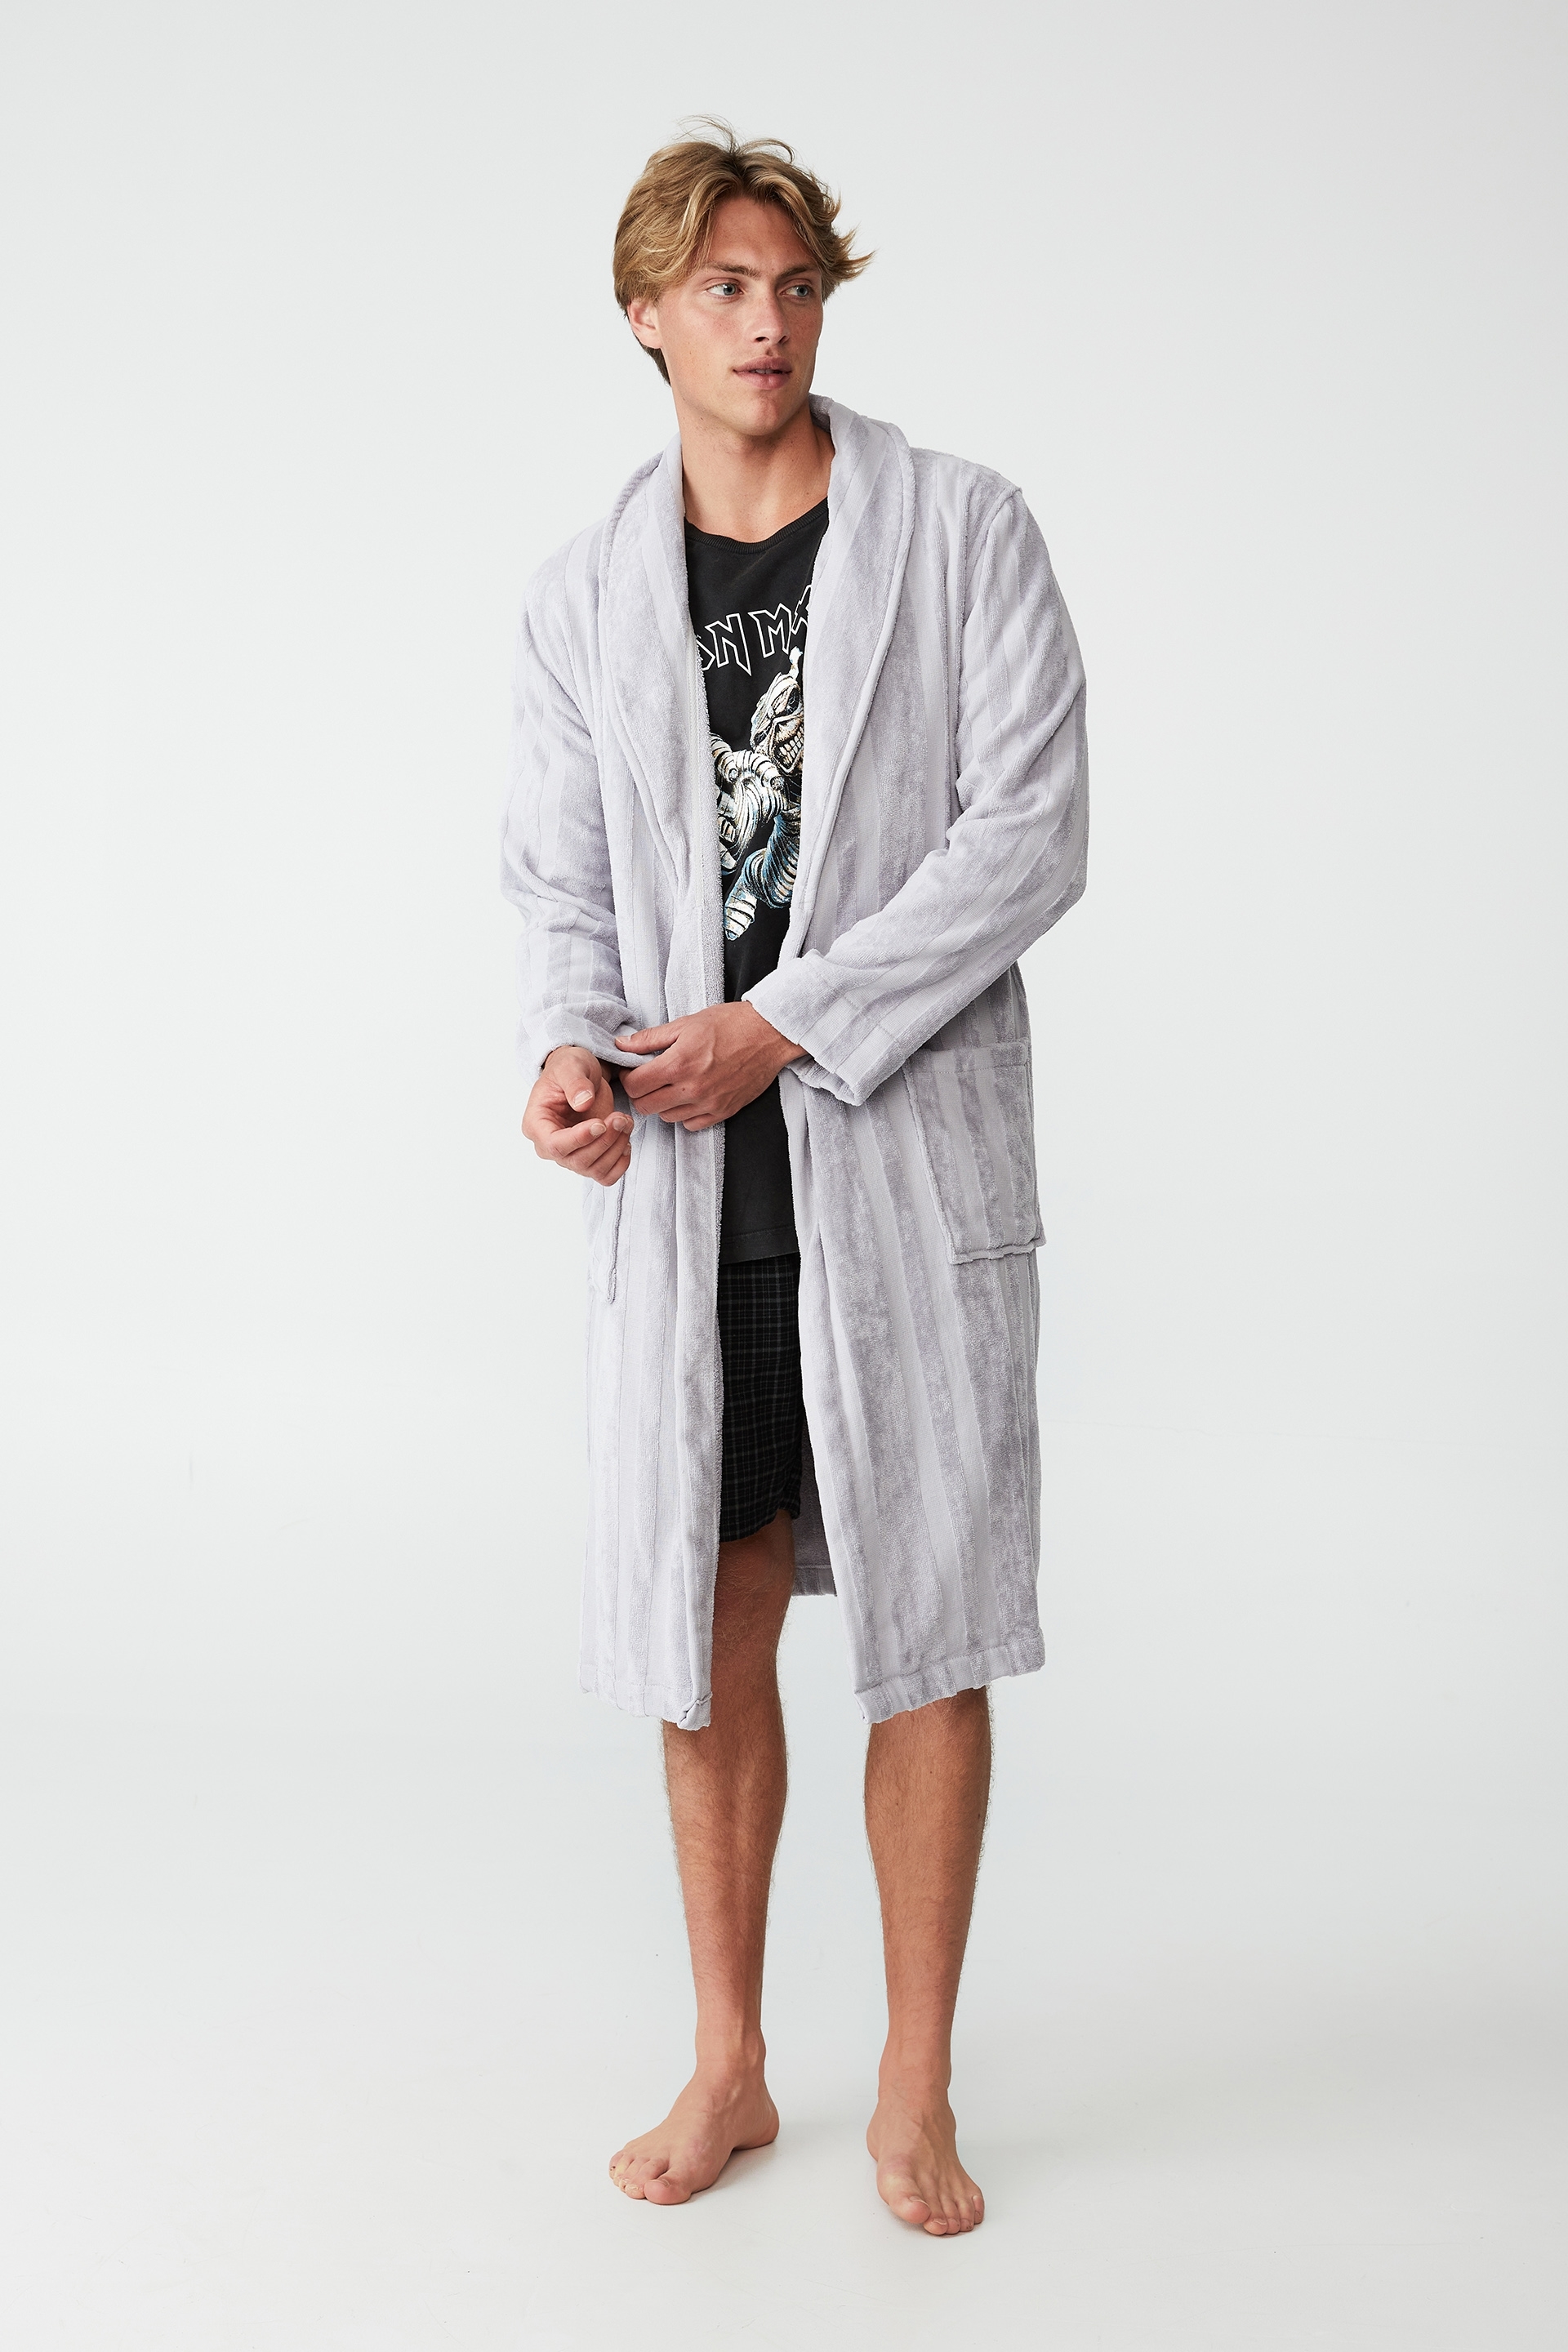 Cotton On Men - Mens Toweling Gown - Grey marle